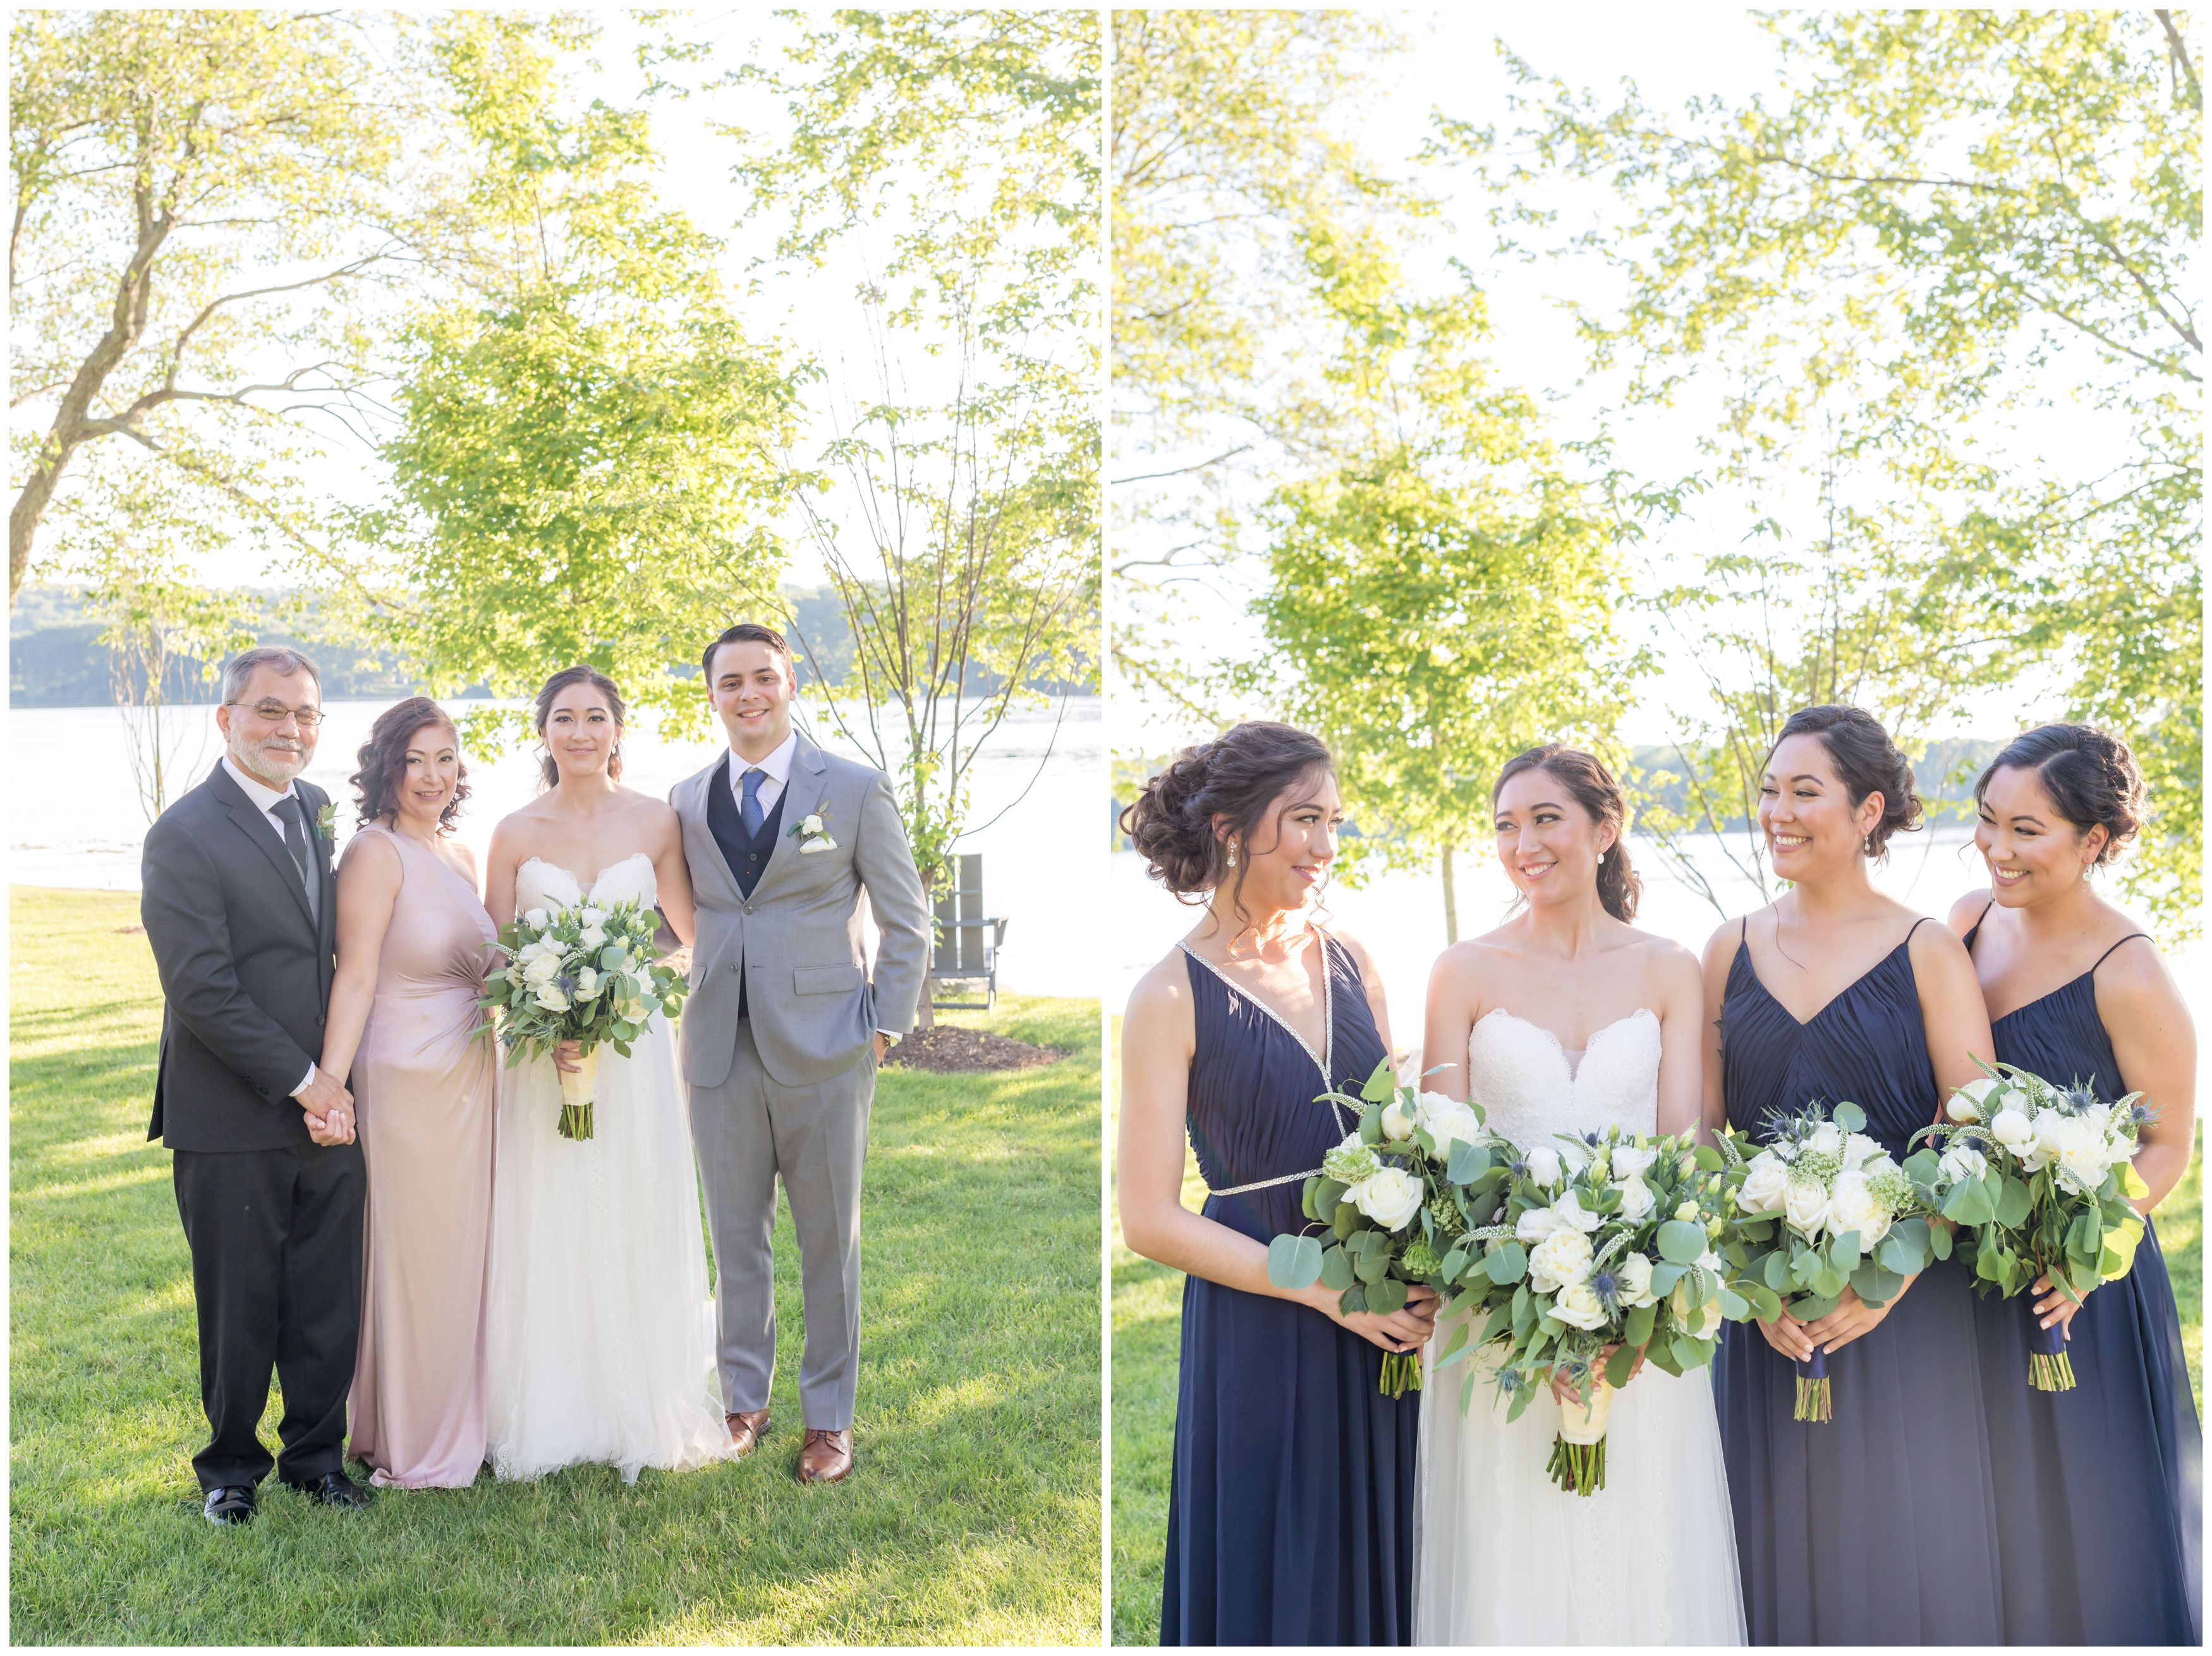 Brides family at outdoor lakeside ceremony